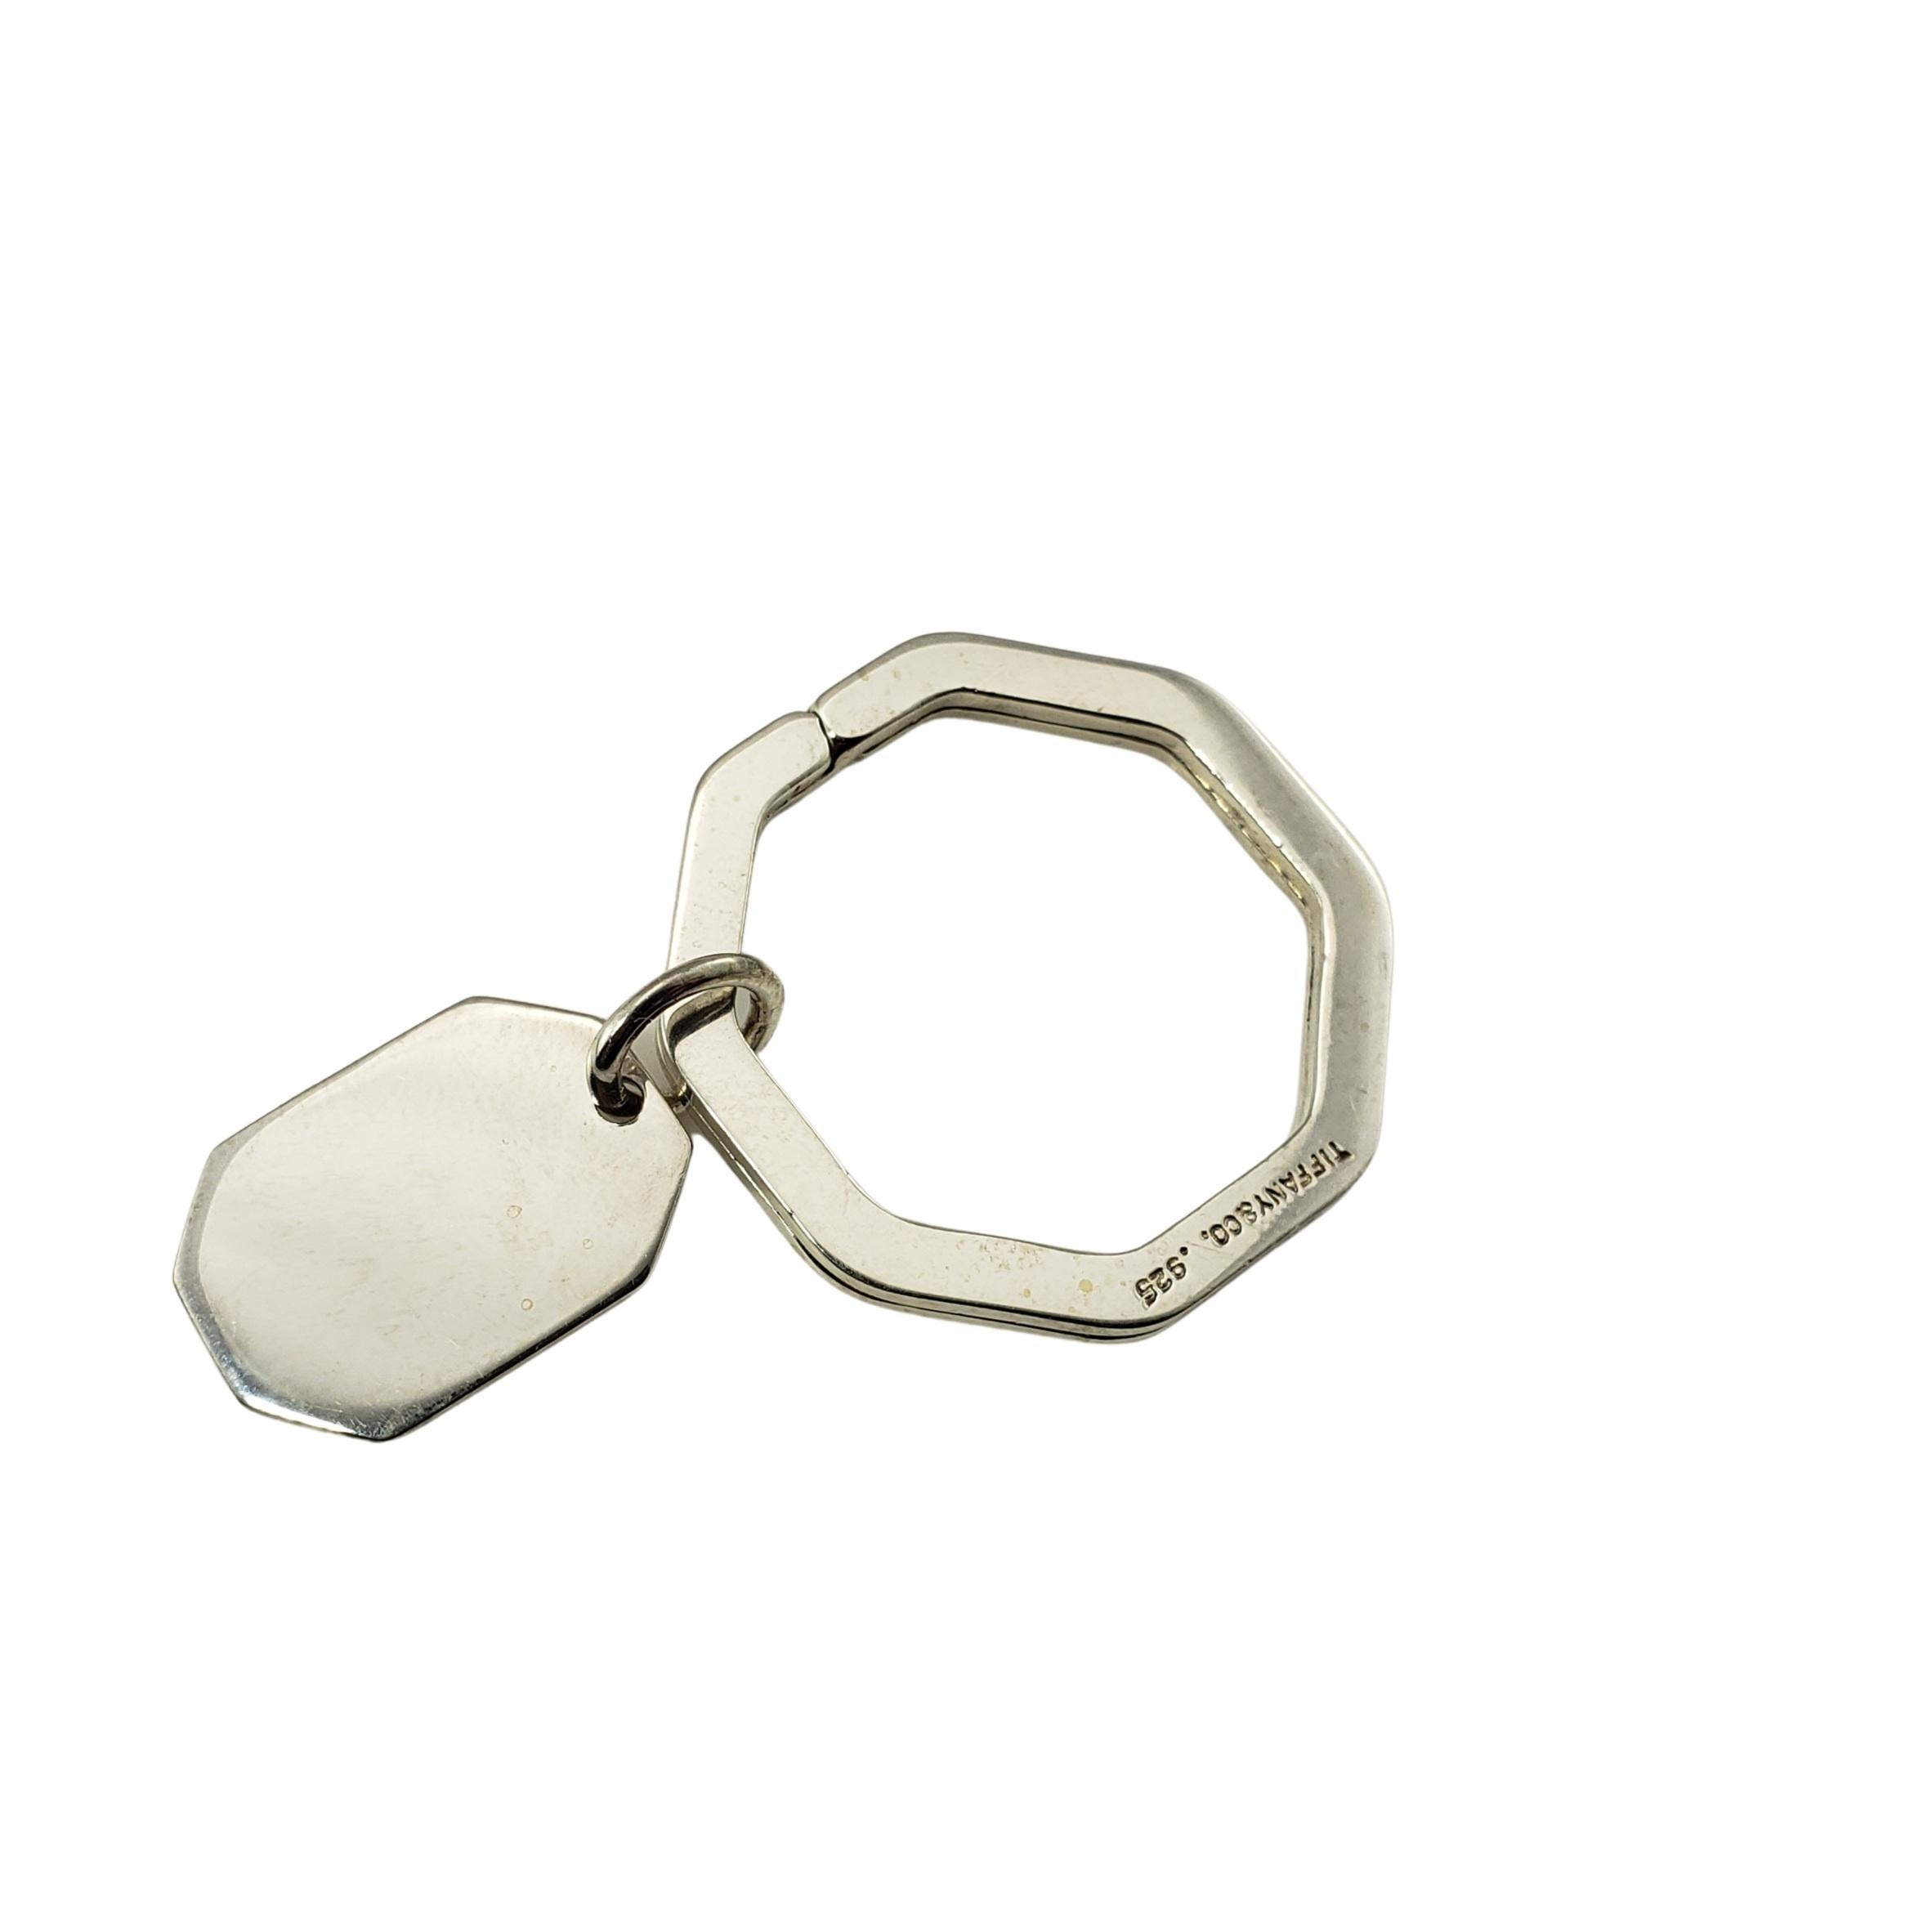 Tiffany & Co. Sterling Silver Key Ring-

This elegant Tiffany & Co. key ring featuring a hanging dog tag is crafted in beautifully detailed sterling silver.

Size:   30 mm (key ring)
           20 mm x 14 mm (dog tag)

Weight:  6.4 dwt. /  10.0